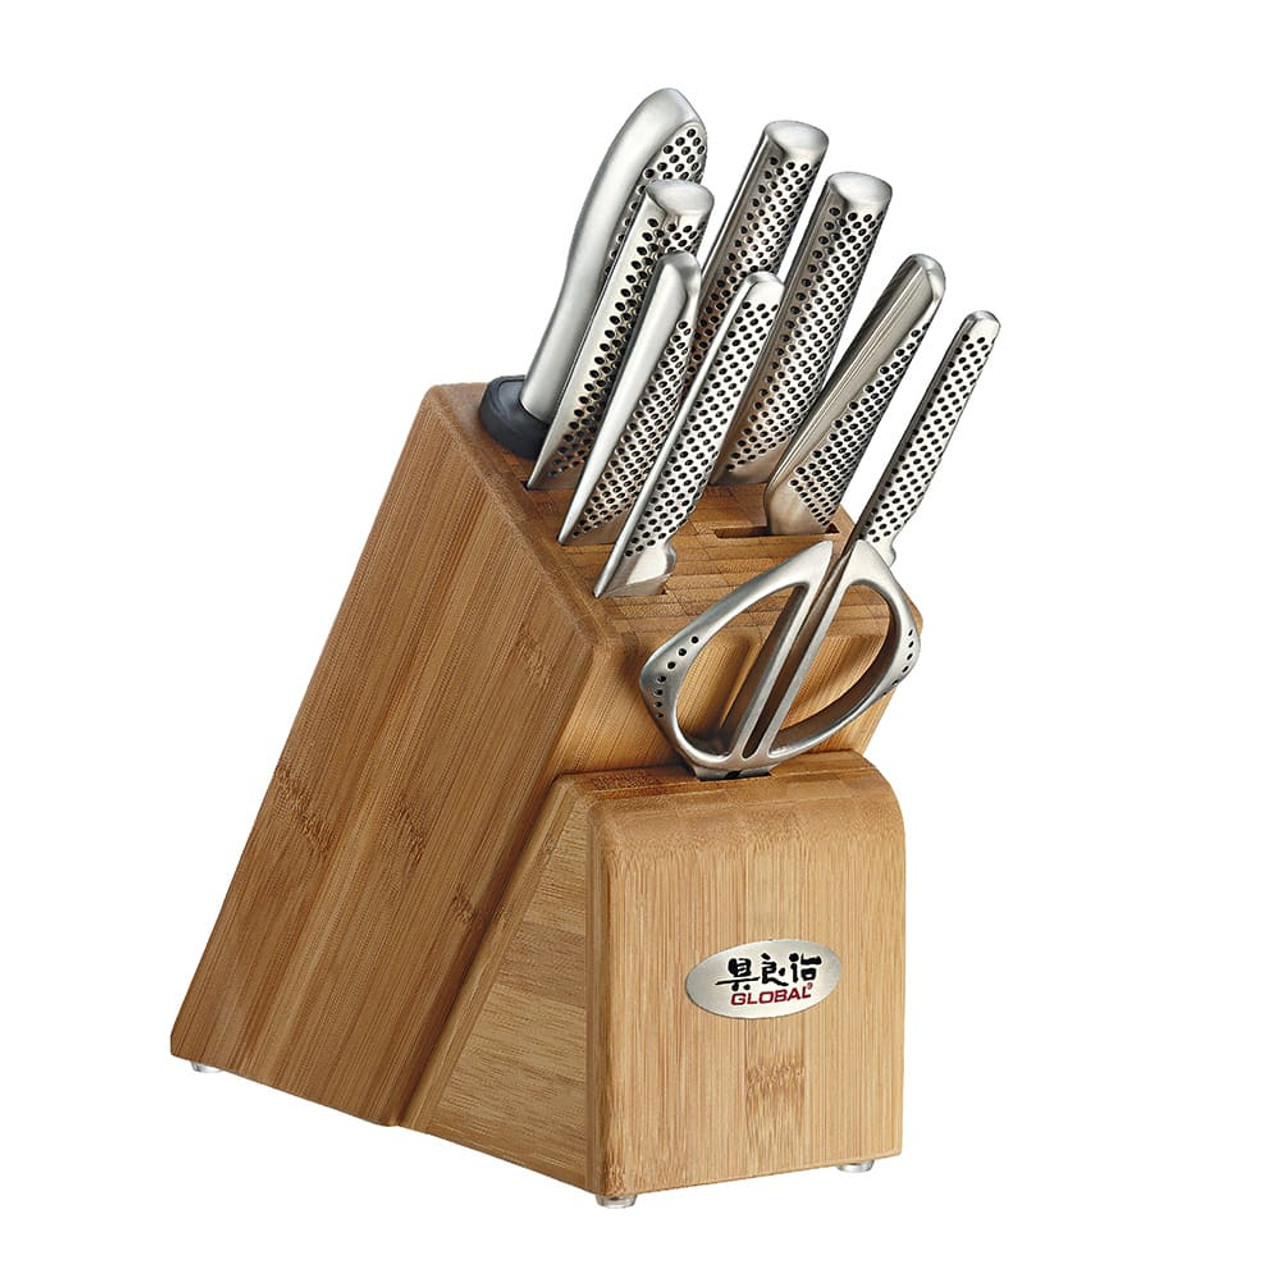 7pc Chopping Kitchen Set With 6pc Knife Block Set & In-Built Knife Sharpener And Large Gourmet Birchwood Chopping Board